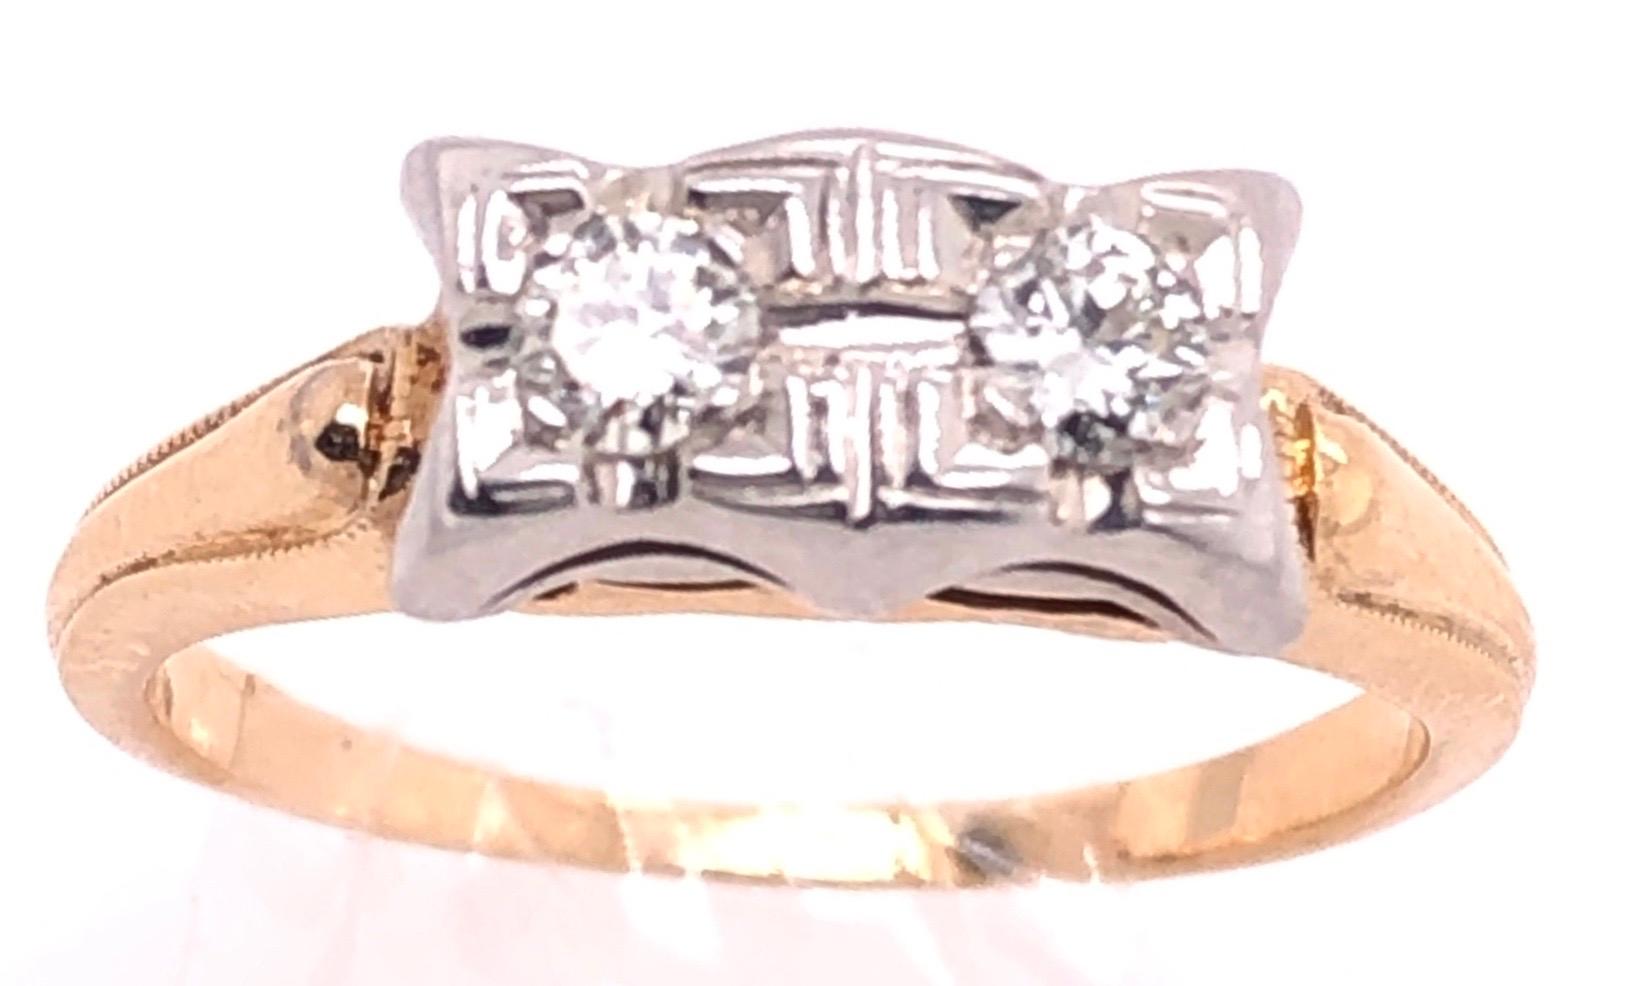 14 Karat Two-Tone Fashion Diamond Ring Engagement In Good Condition For Sale In Stamford, CT